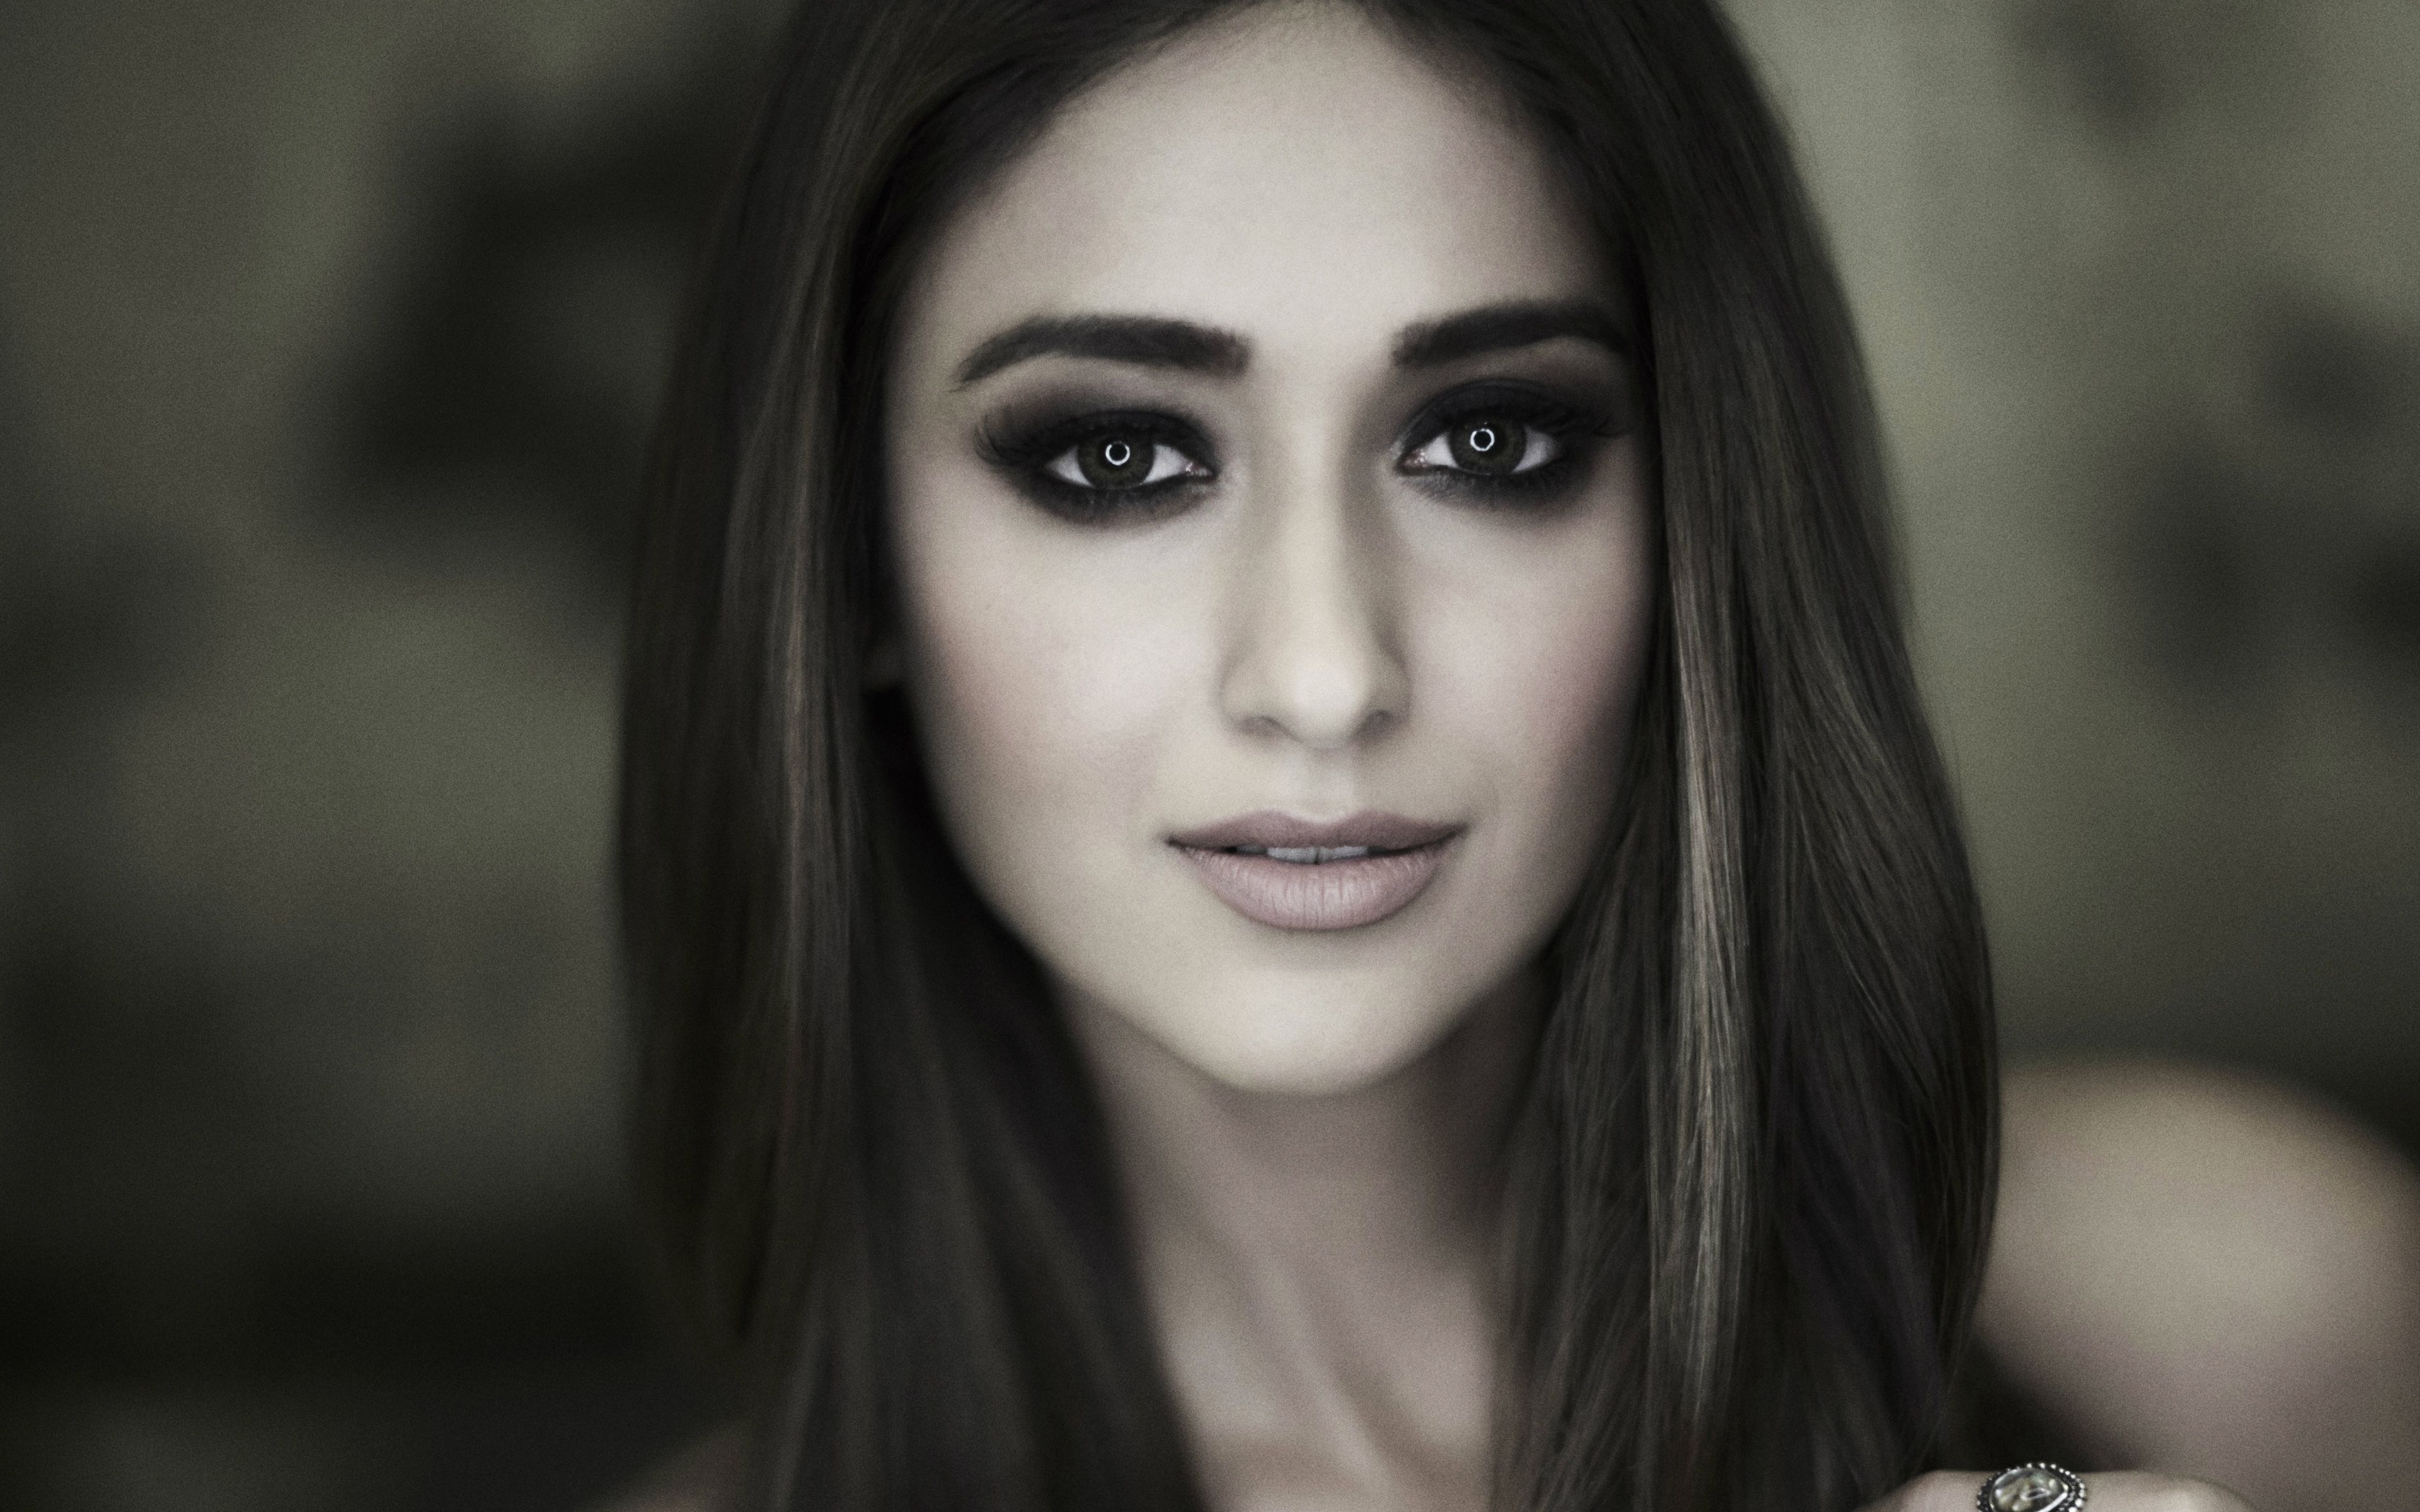 Download wallpaper Ileana DCruz, 4k, Indian actress, makeup model, portrait, beautiful female eyes, Bollywood, Indian women for desktop with resolution 3840x2400. High Quality HD picture wallpaper